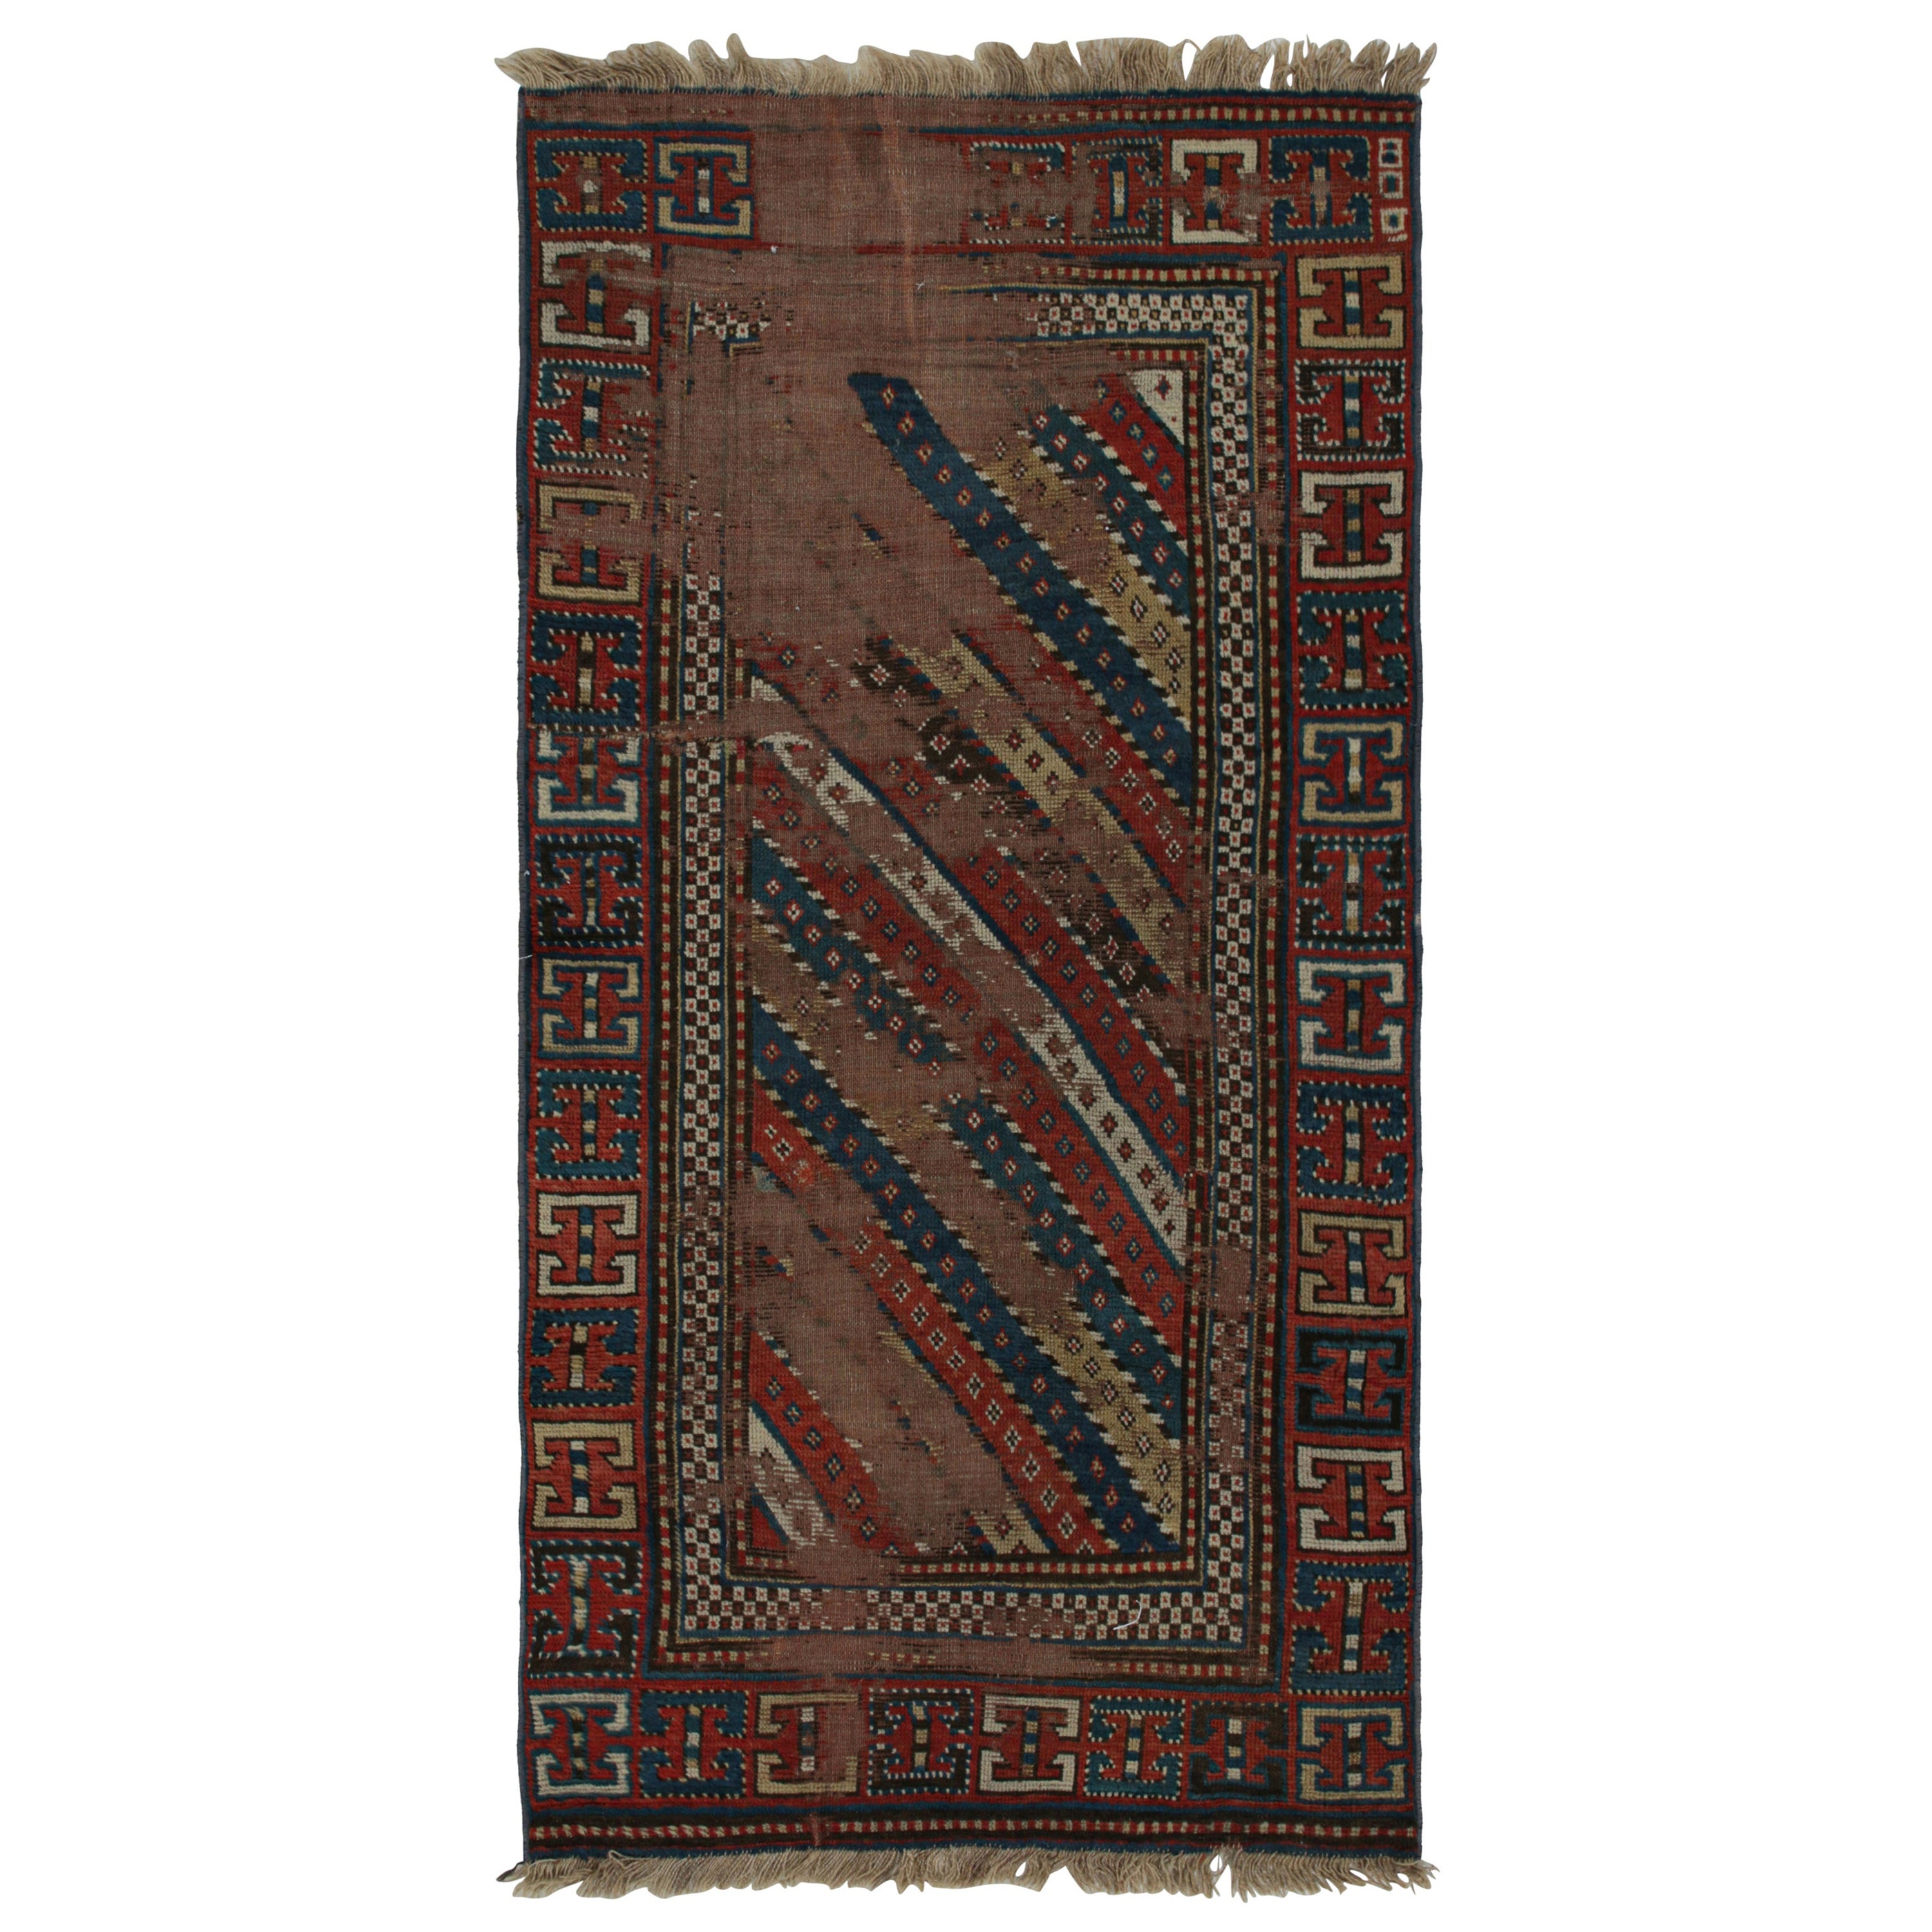 Antique Kazak Runner Rug with Red & Blue Geometric Patterns, from Rug & Kilim